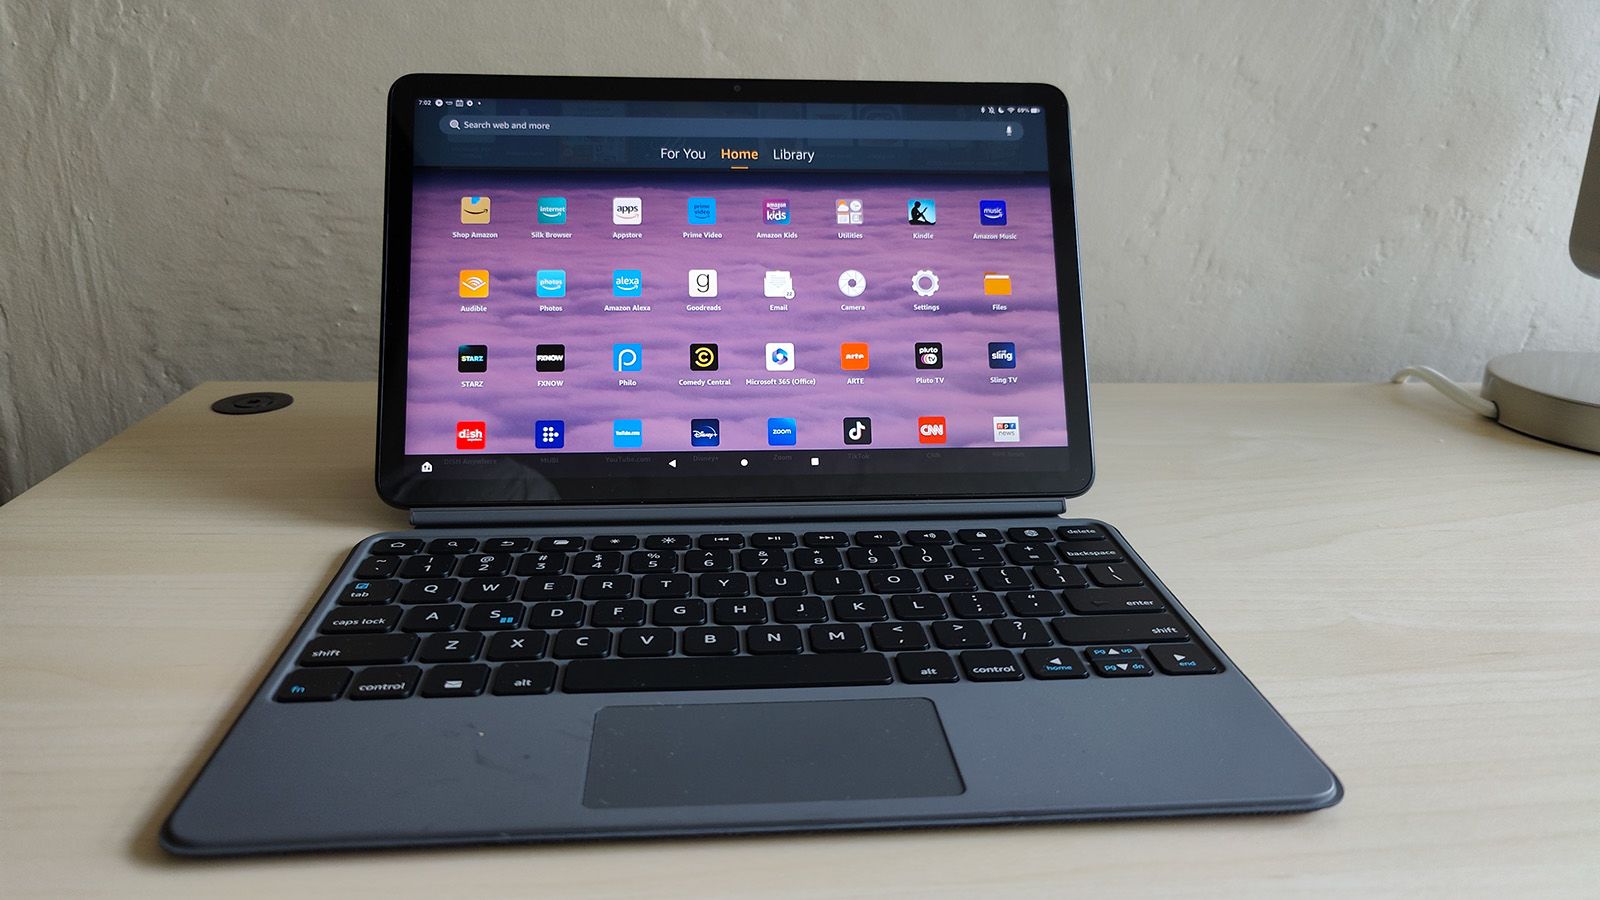 Xiaomi Pad 6 review: Good for gaming, learning, and everything in between